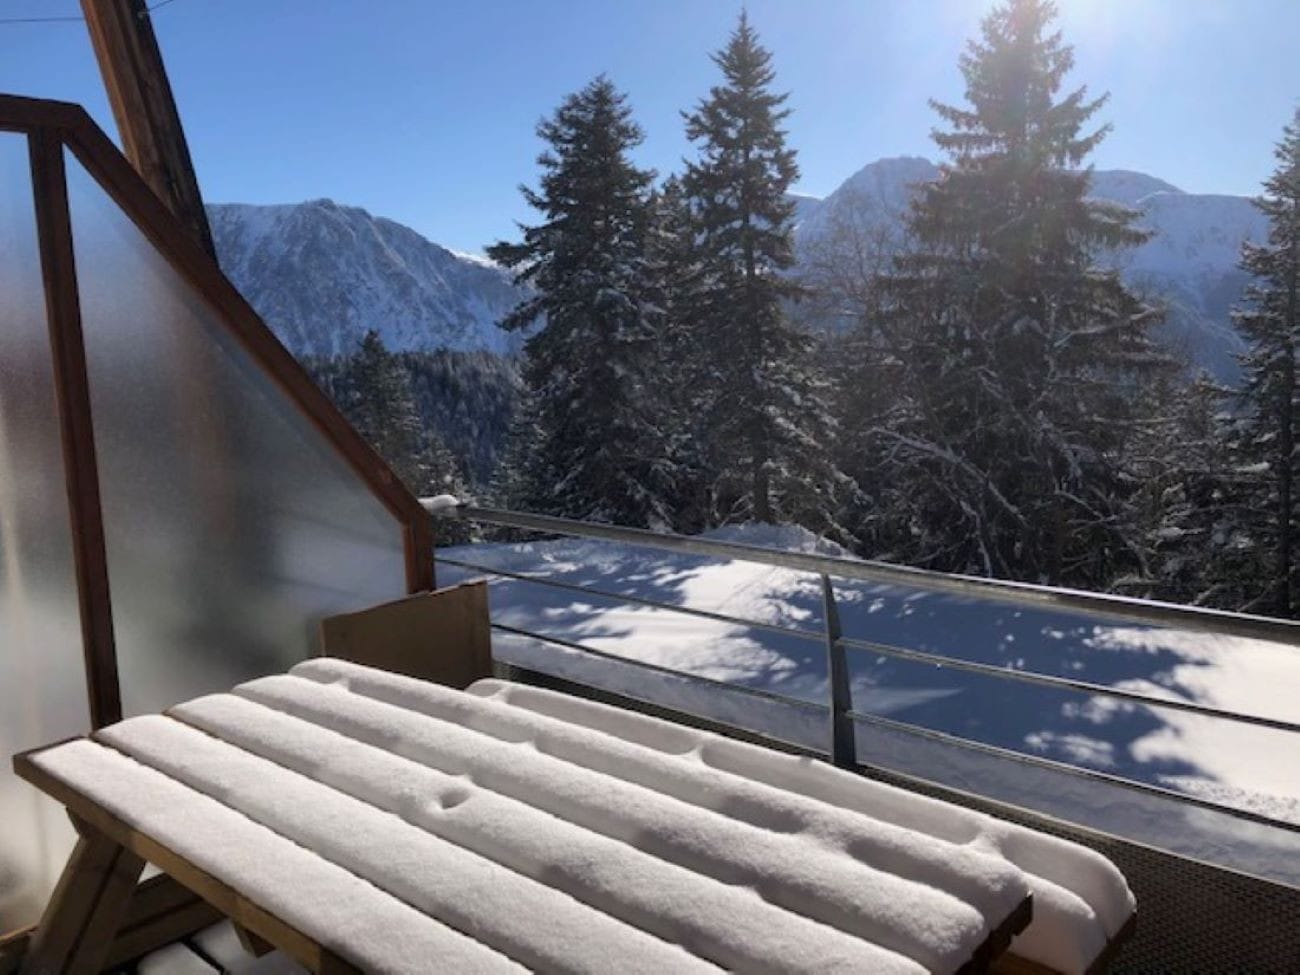 2 rooms 6 persons mountain view - Apartements V du Bachat Arolles A12 - Appt 6 pers - Chamrousse